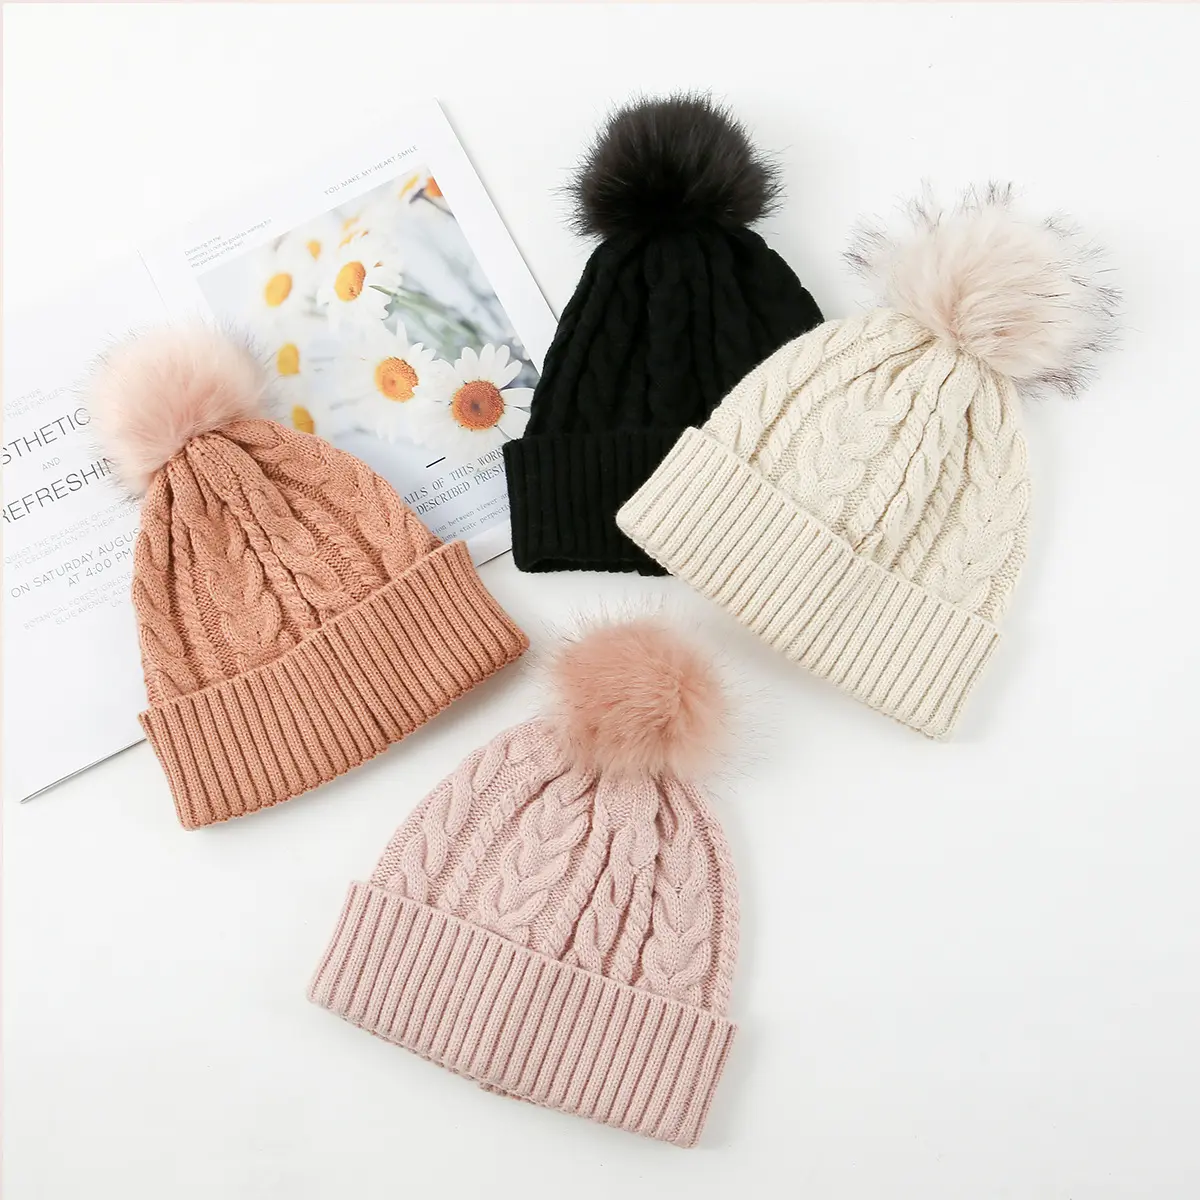 Newly Designed Korean Style Winter Knitting Pattern for Adults Pompom Bennie Hat